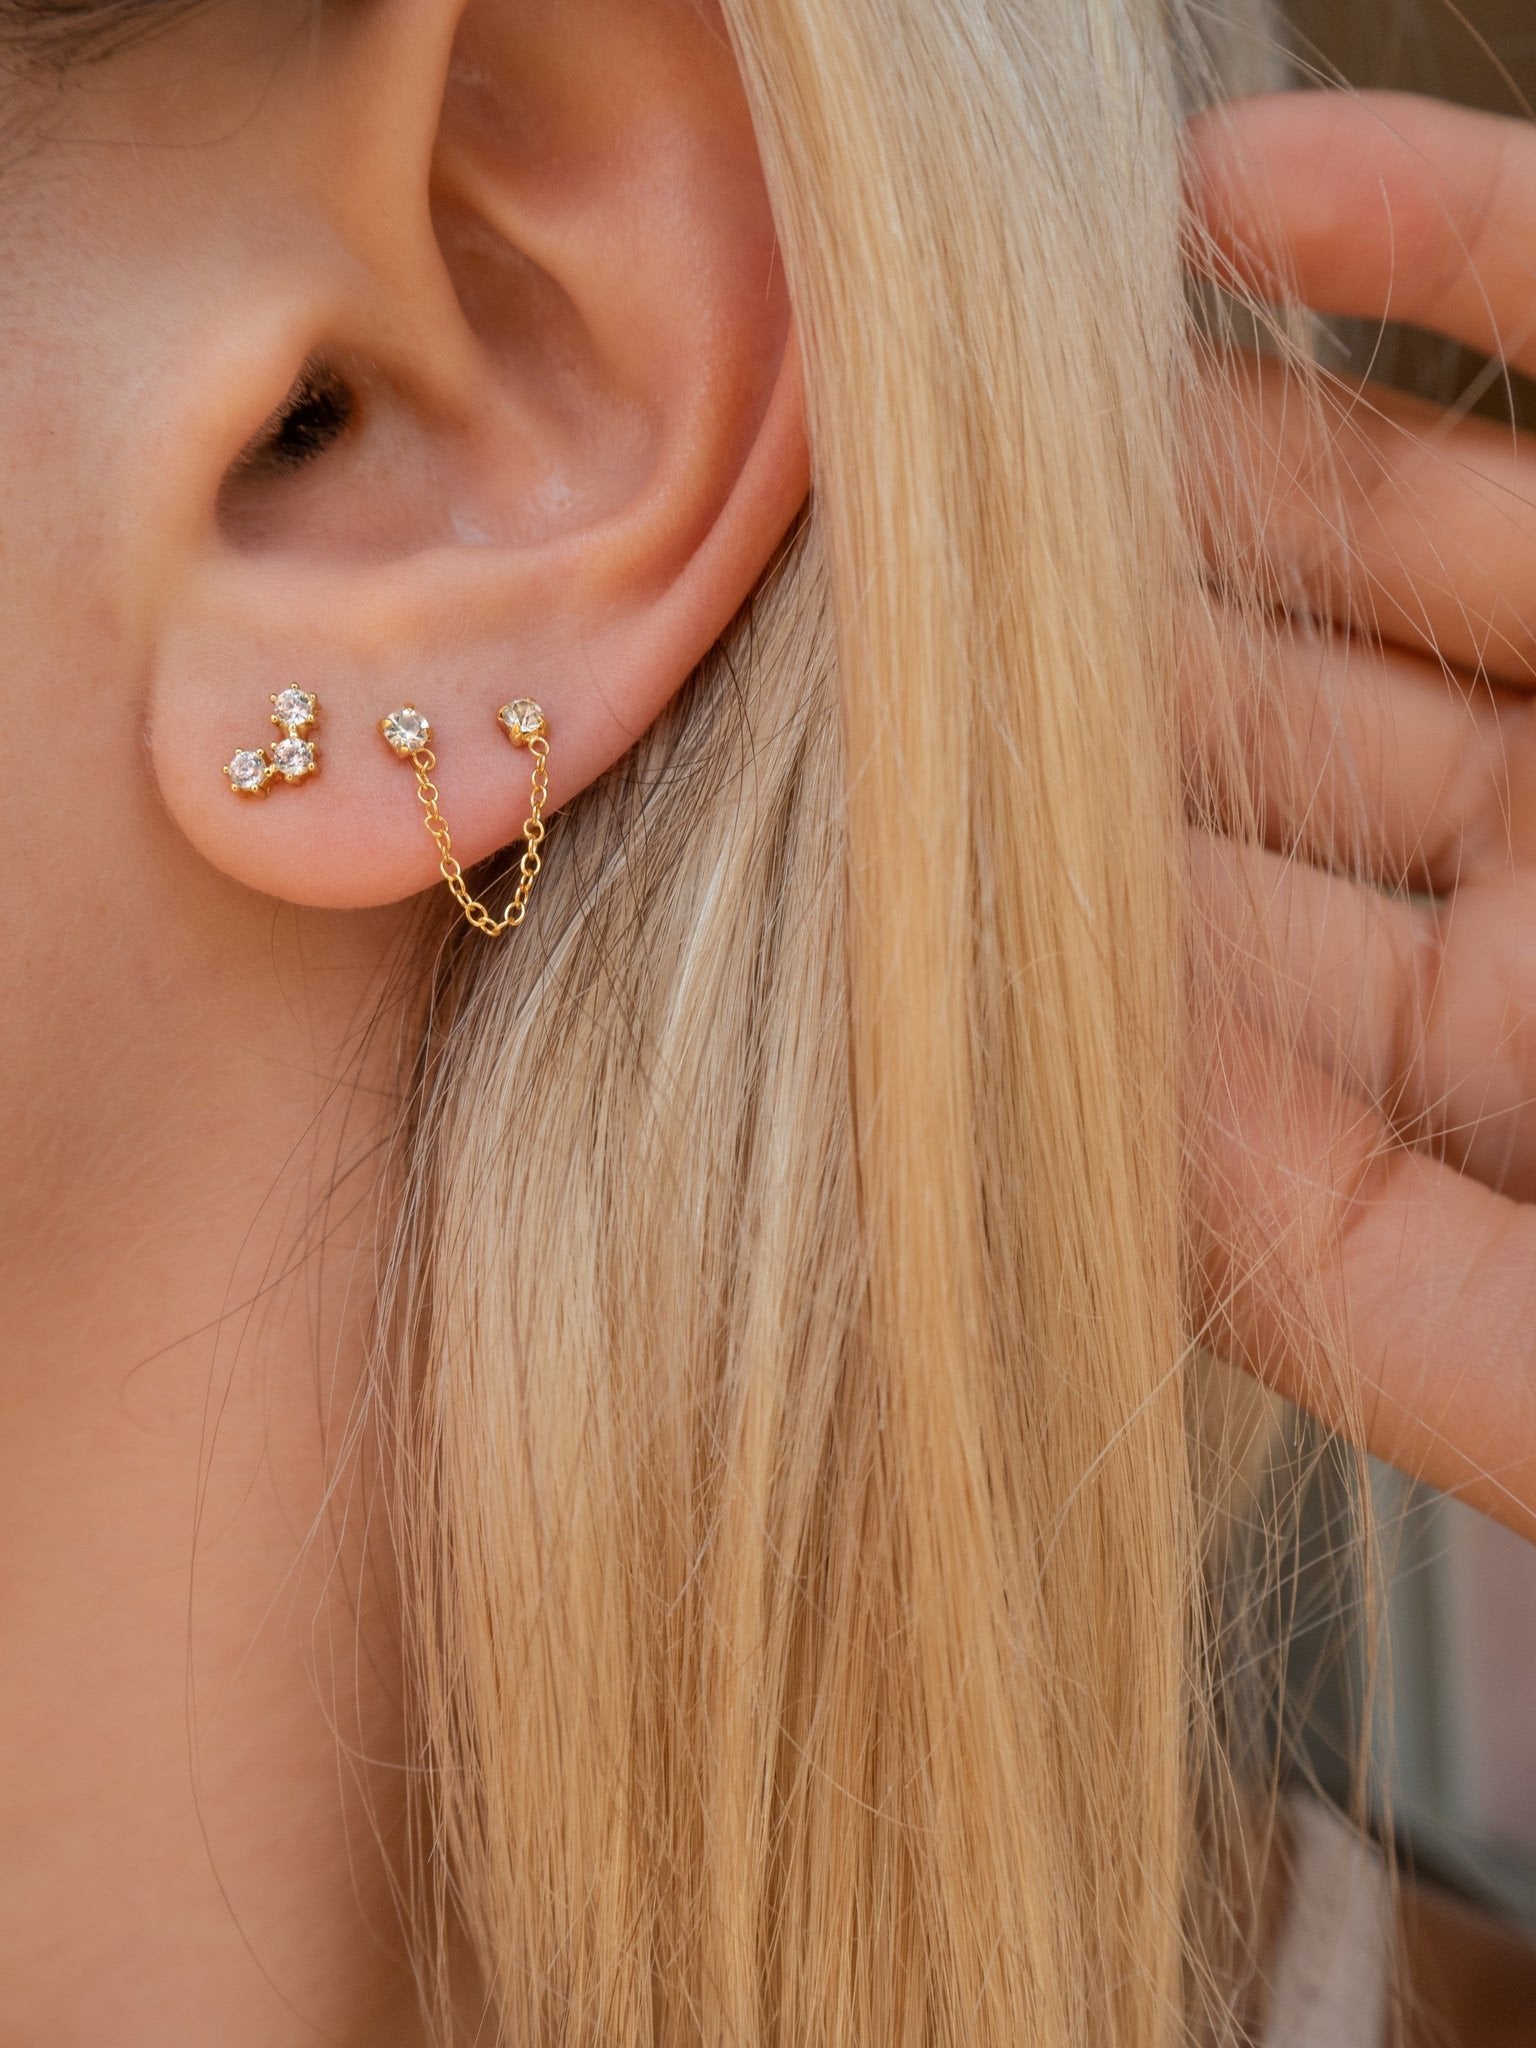 Tiny Gold Dot Studs Very Small Gold Stud Earrings 9ct Gold Studs, Second  Piercing Studs, Solid Gold Studs, Jewellery UK, 2mm Gold Studs - Etsy |  Earings piercings, Pretty ear piercings, Minimalist